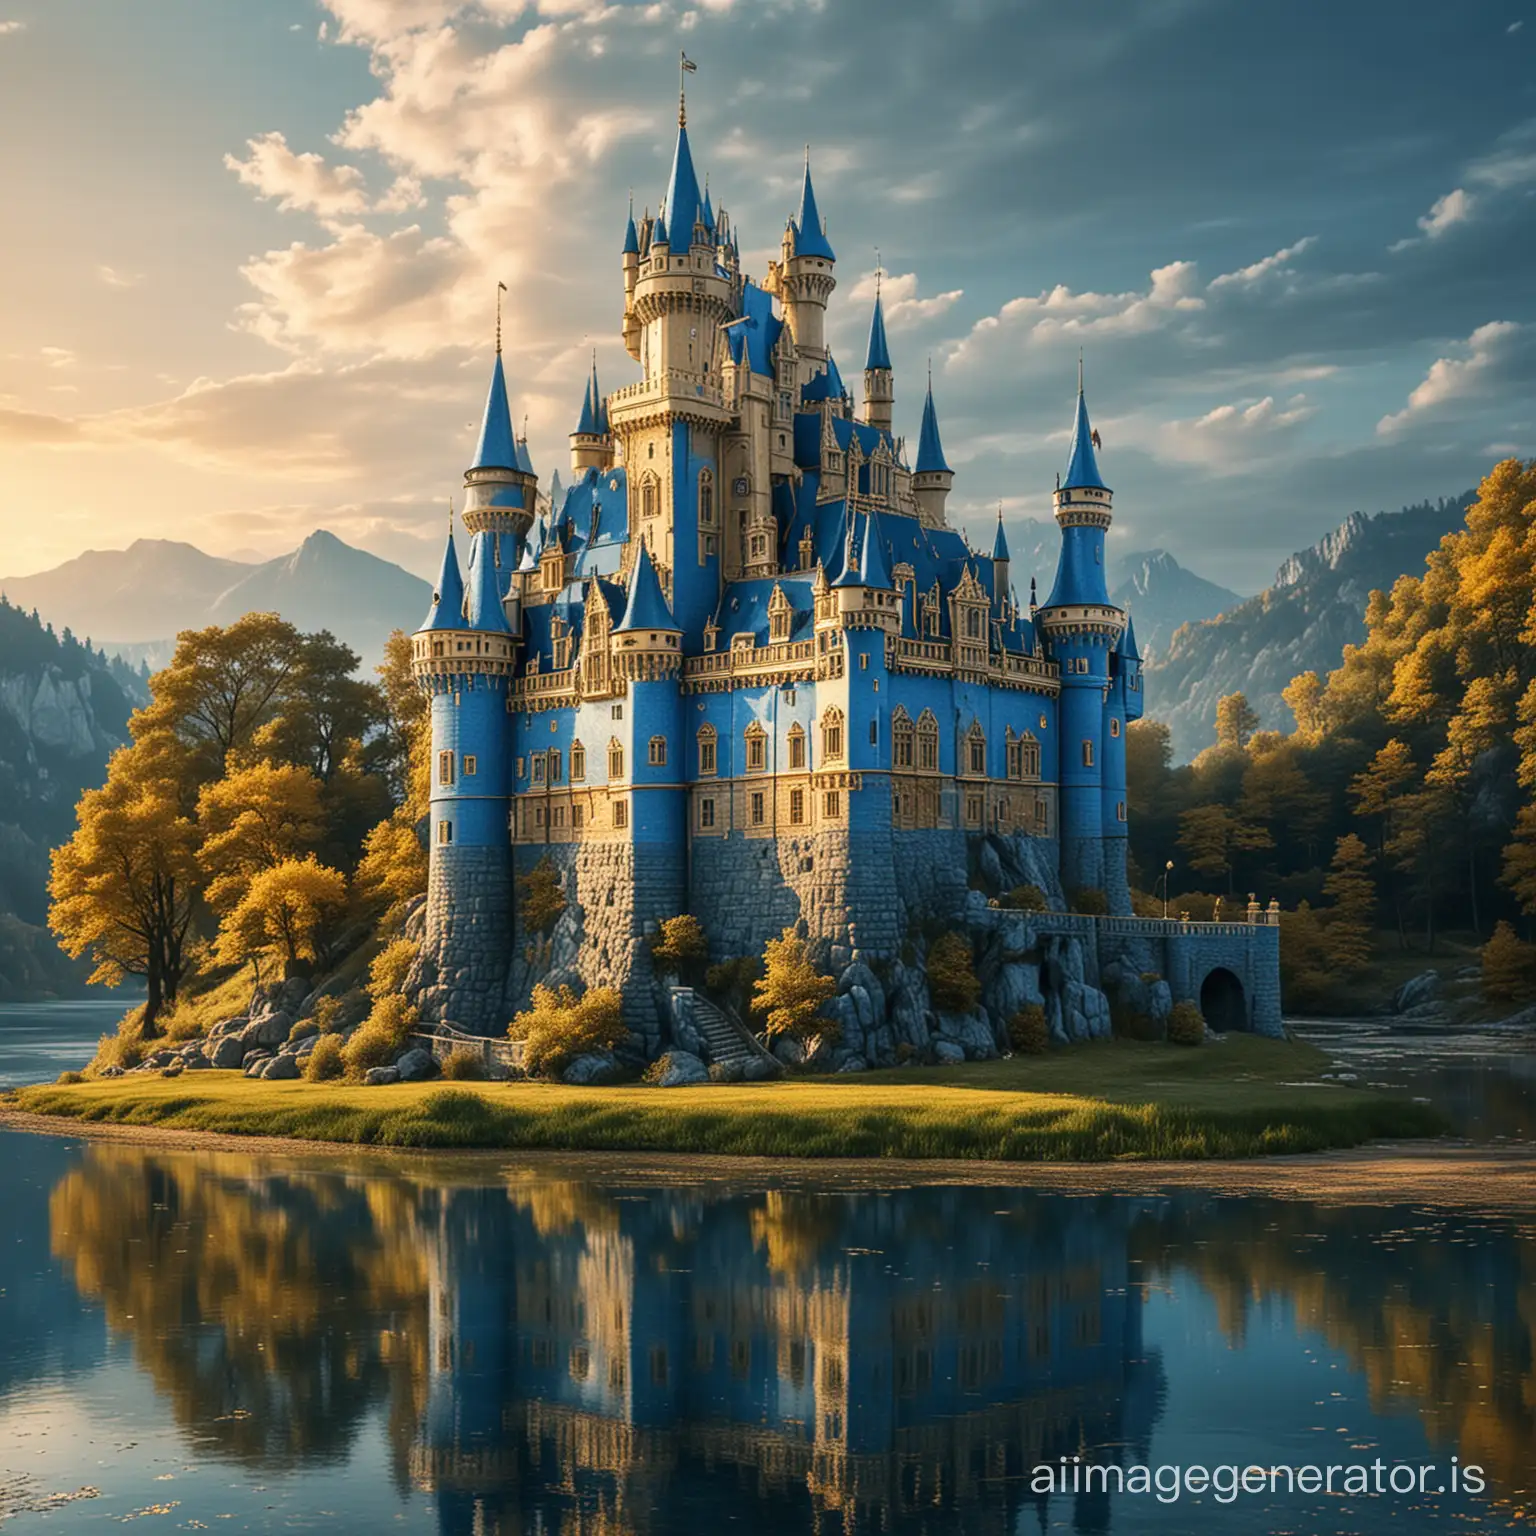 Majestic-Blue-and-Golden-Castle-Enchanting-Fortress-in-a-Dreamlike-Setting